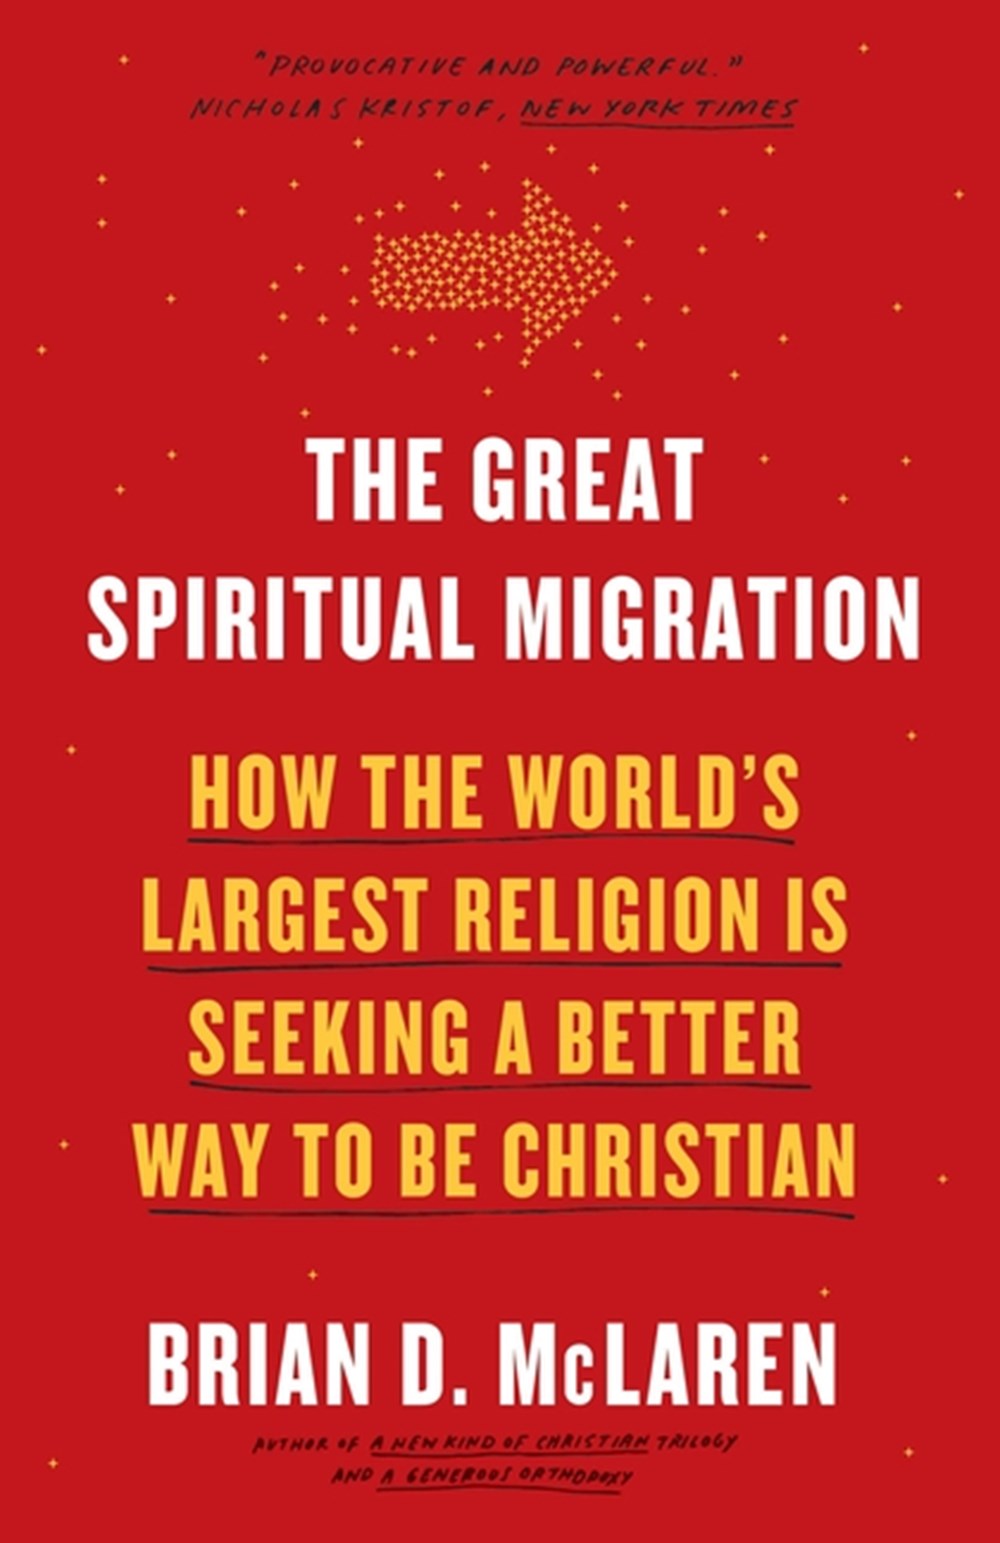 Great Spiritual Migration: How the World's Largest Religion Is Seeking a Better Way to Be Christian